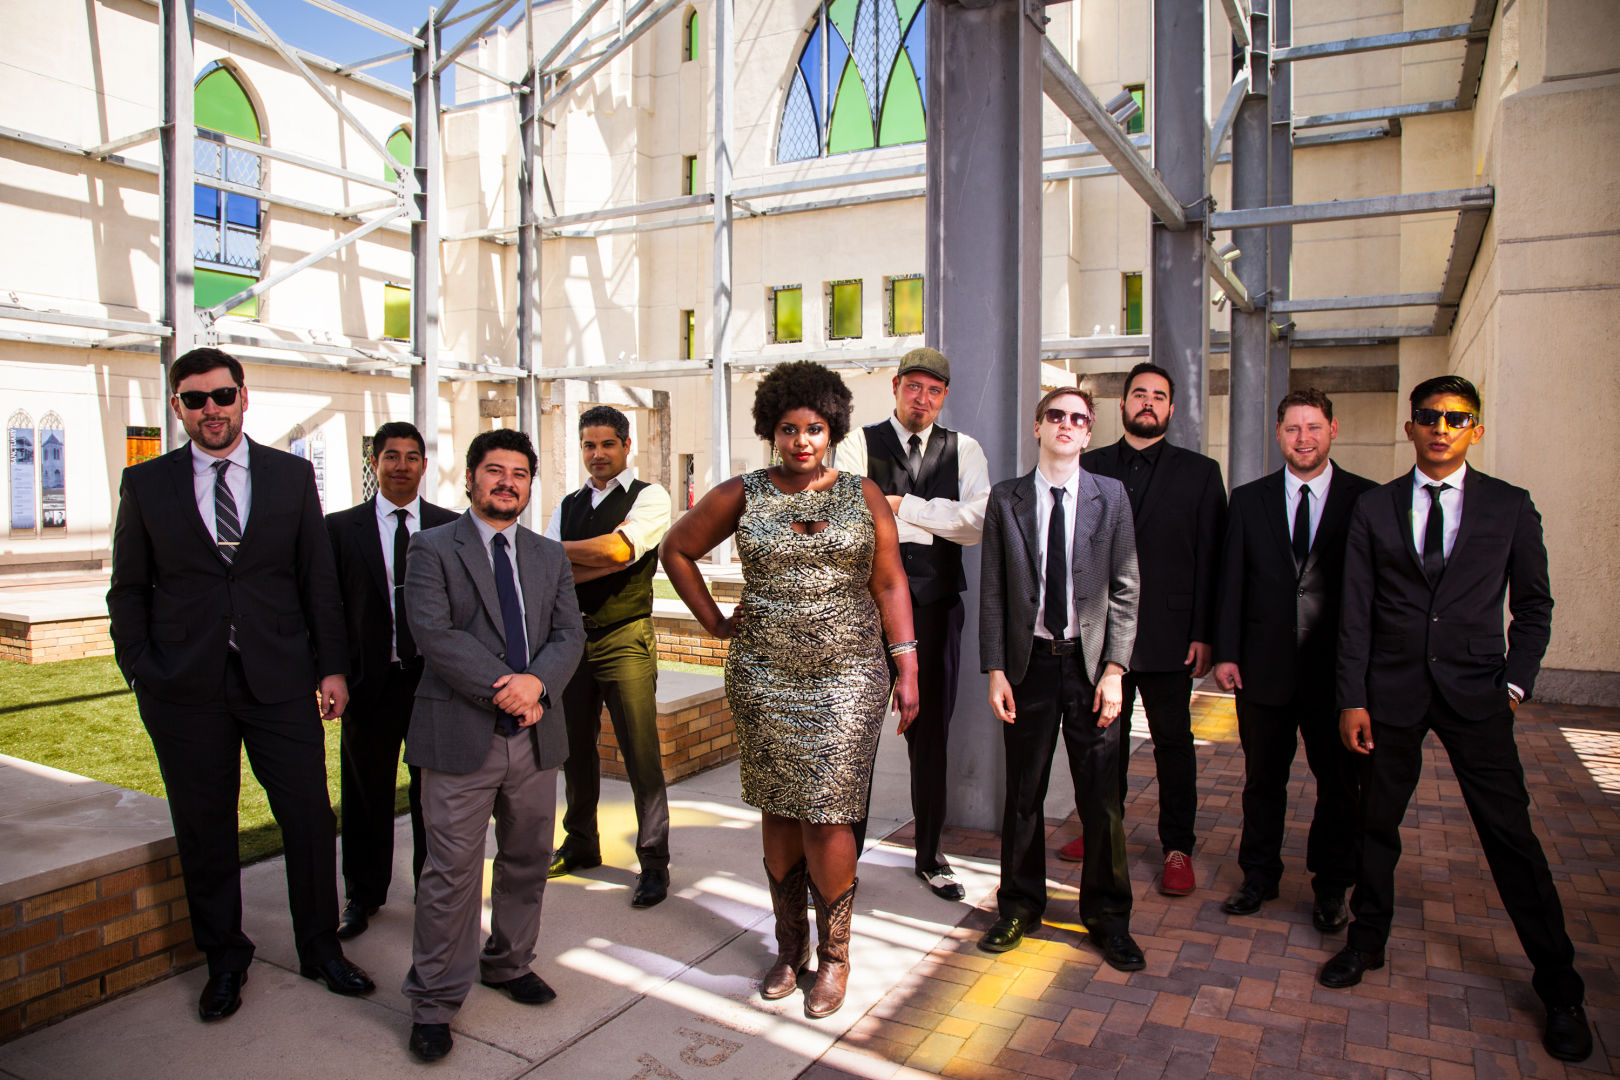 The Suffers are a local Houston band that will perform with the Spirit of Houston Nov. 14. Photo courtesy of Daniel Jackson. 